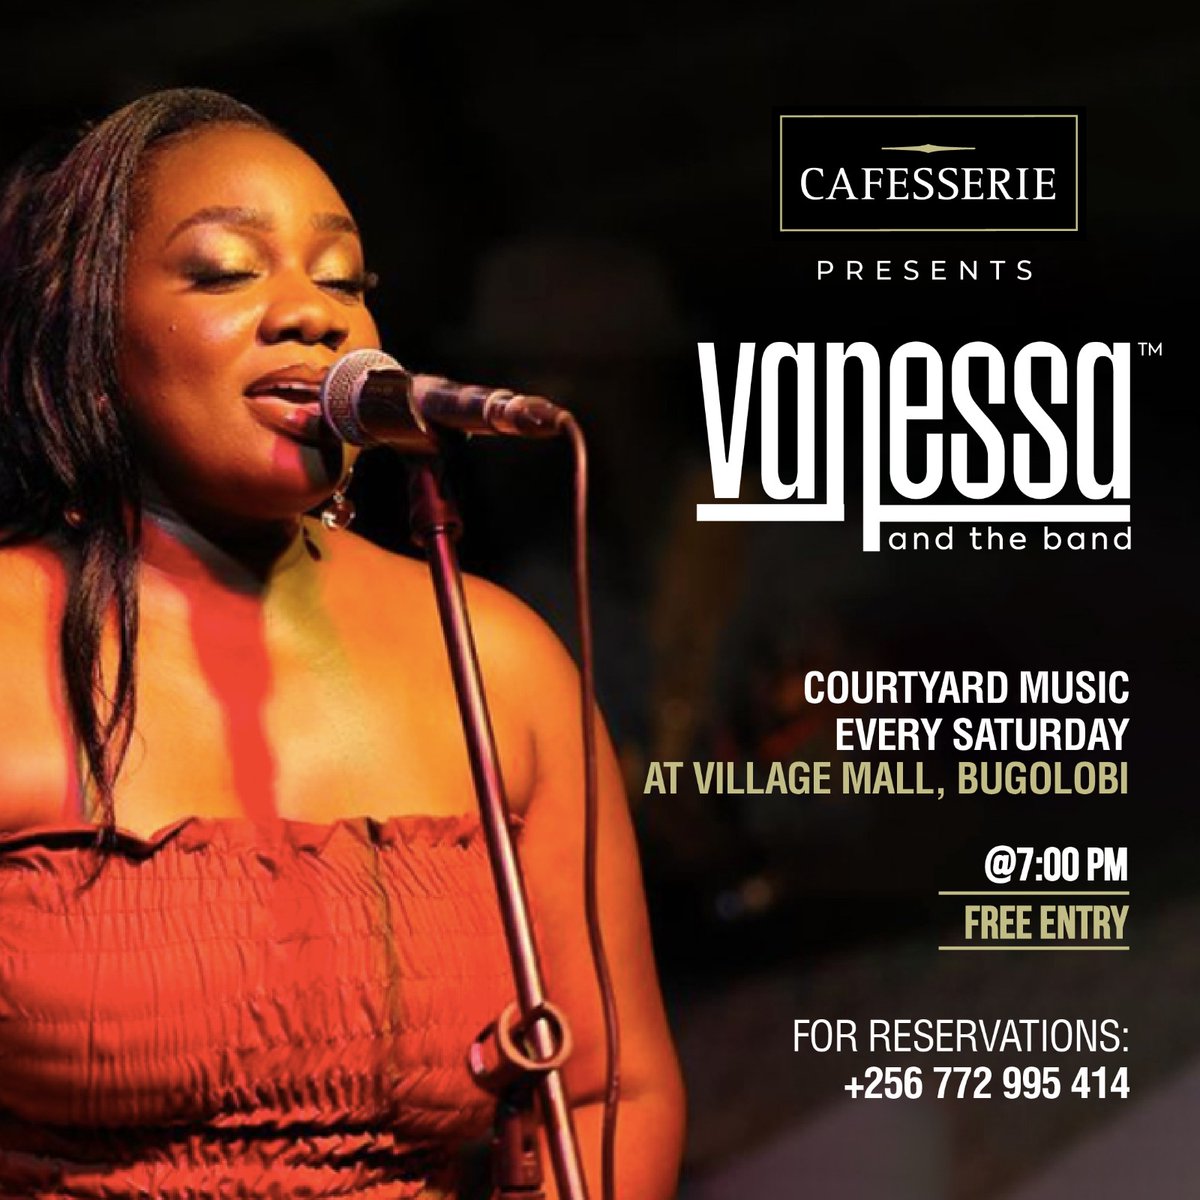 Tomorrow, #Saturday, don't miss an epic band #music performance by Vanessa and the band at Cafesserie Village mall bugolobi!💃🎶🍹🍝 Starting at 7pm. #BeOurGuest #DineWithUs